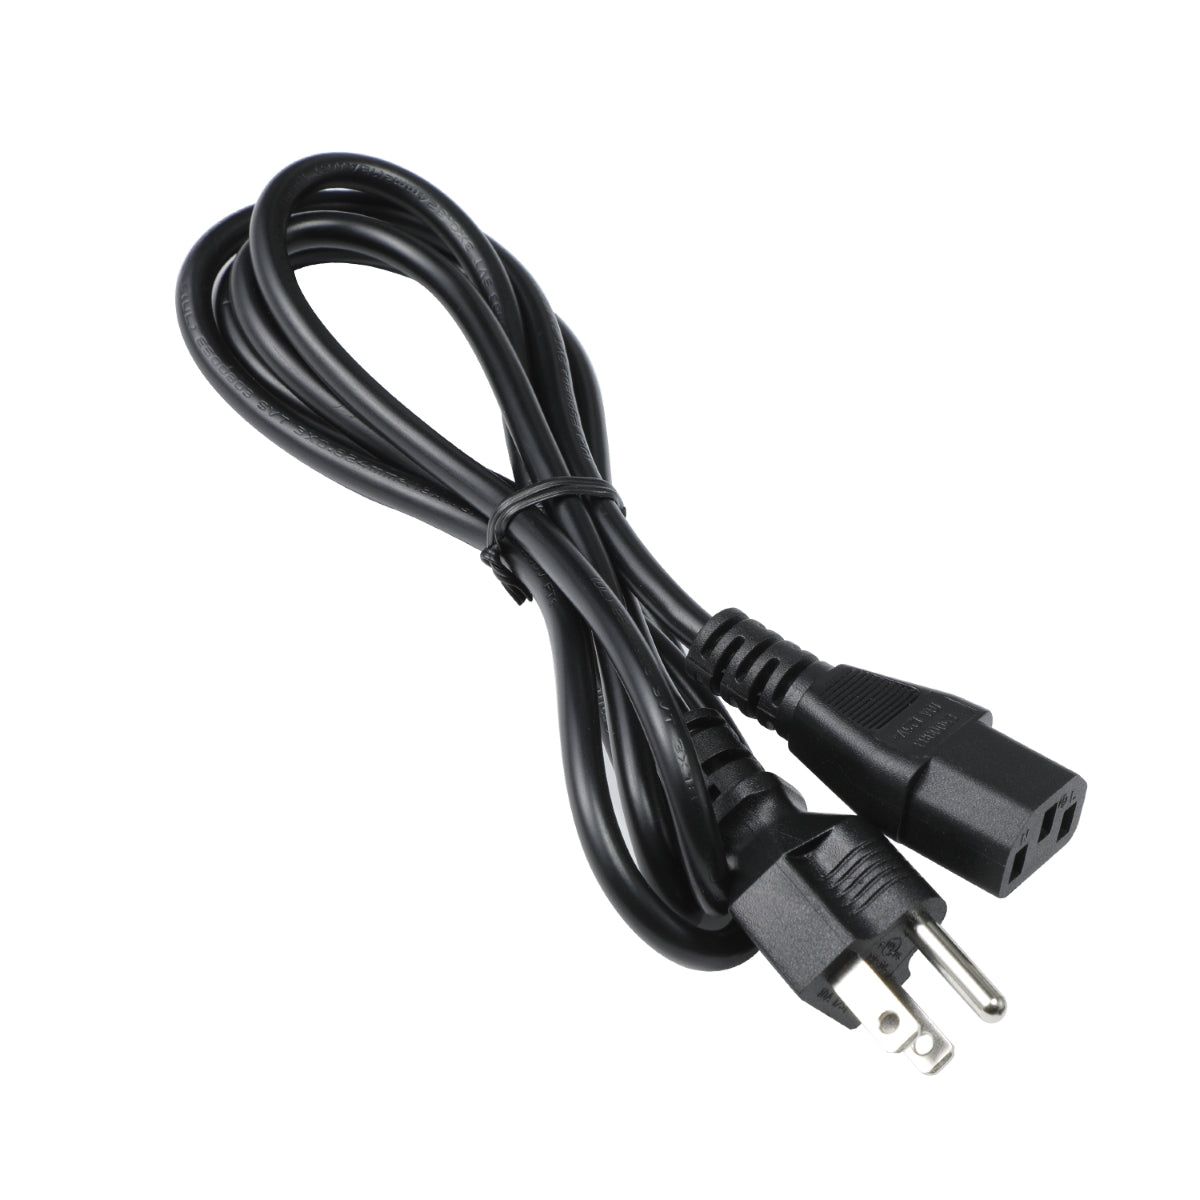 Power Cord for ViewSonic VG2039m-LED Monitor